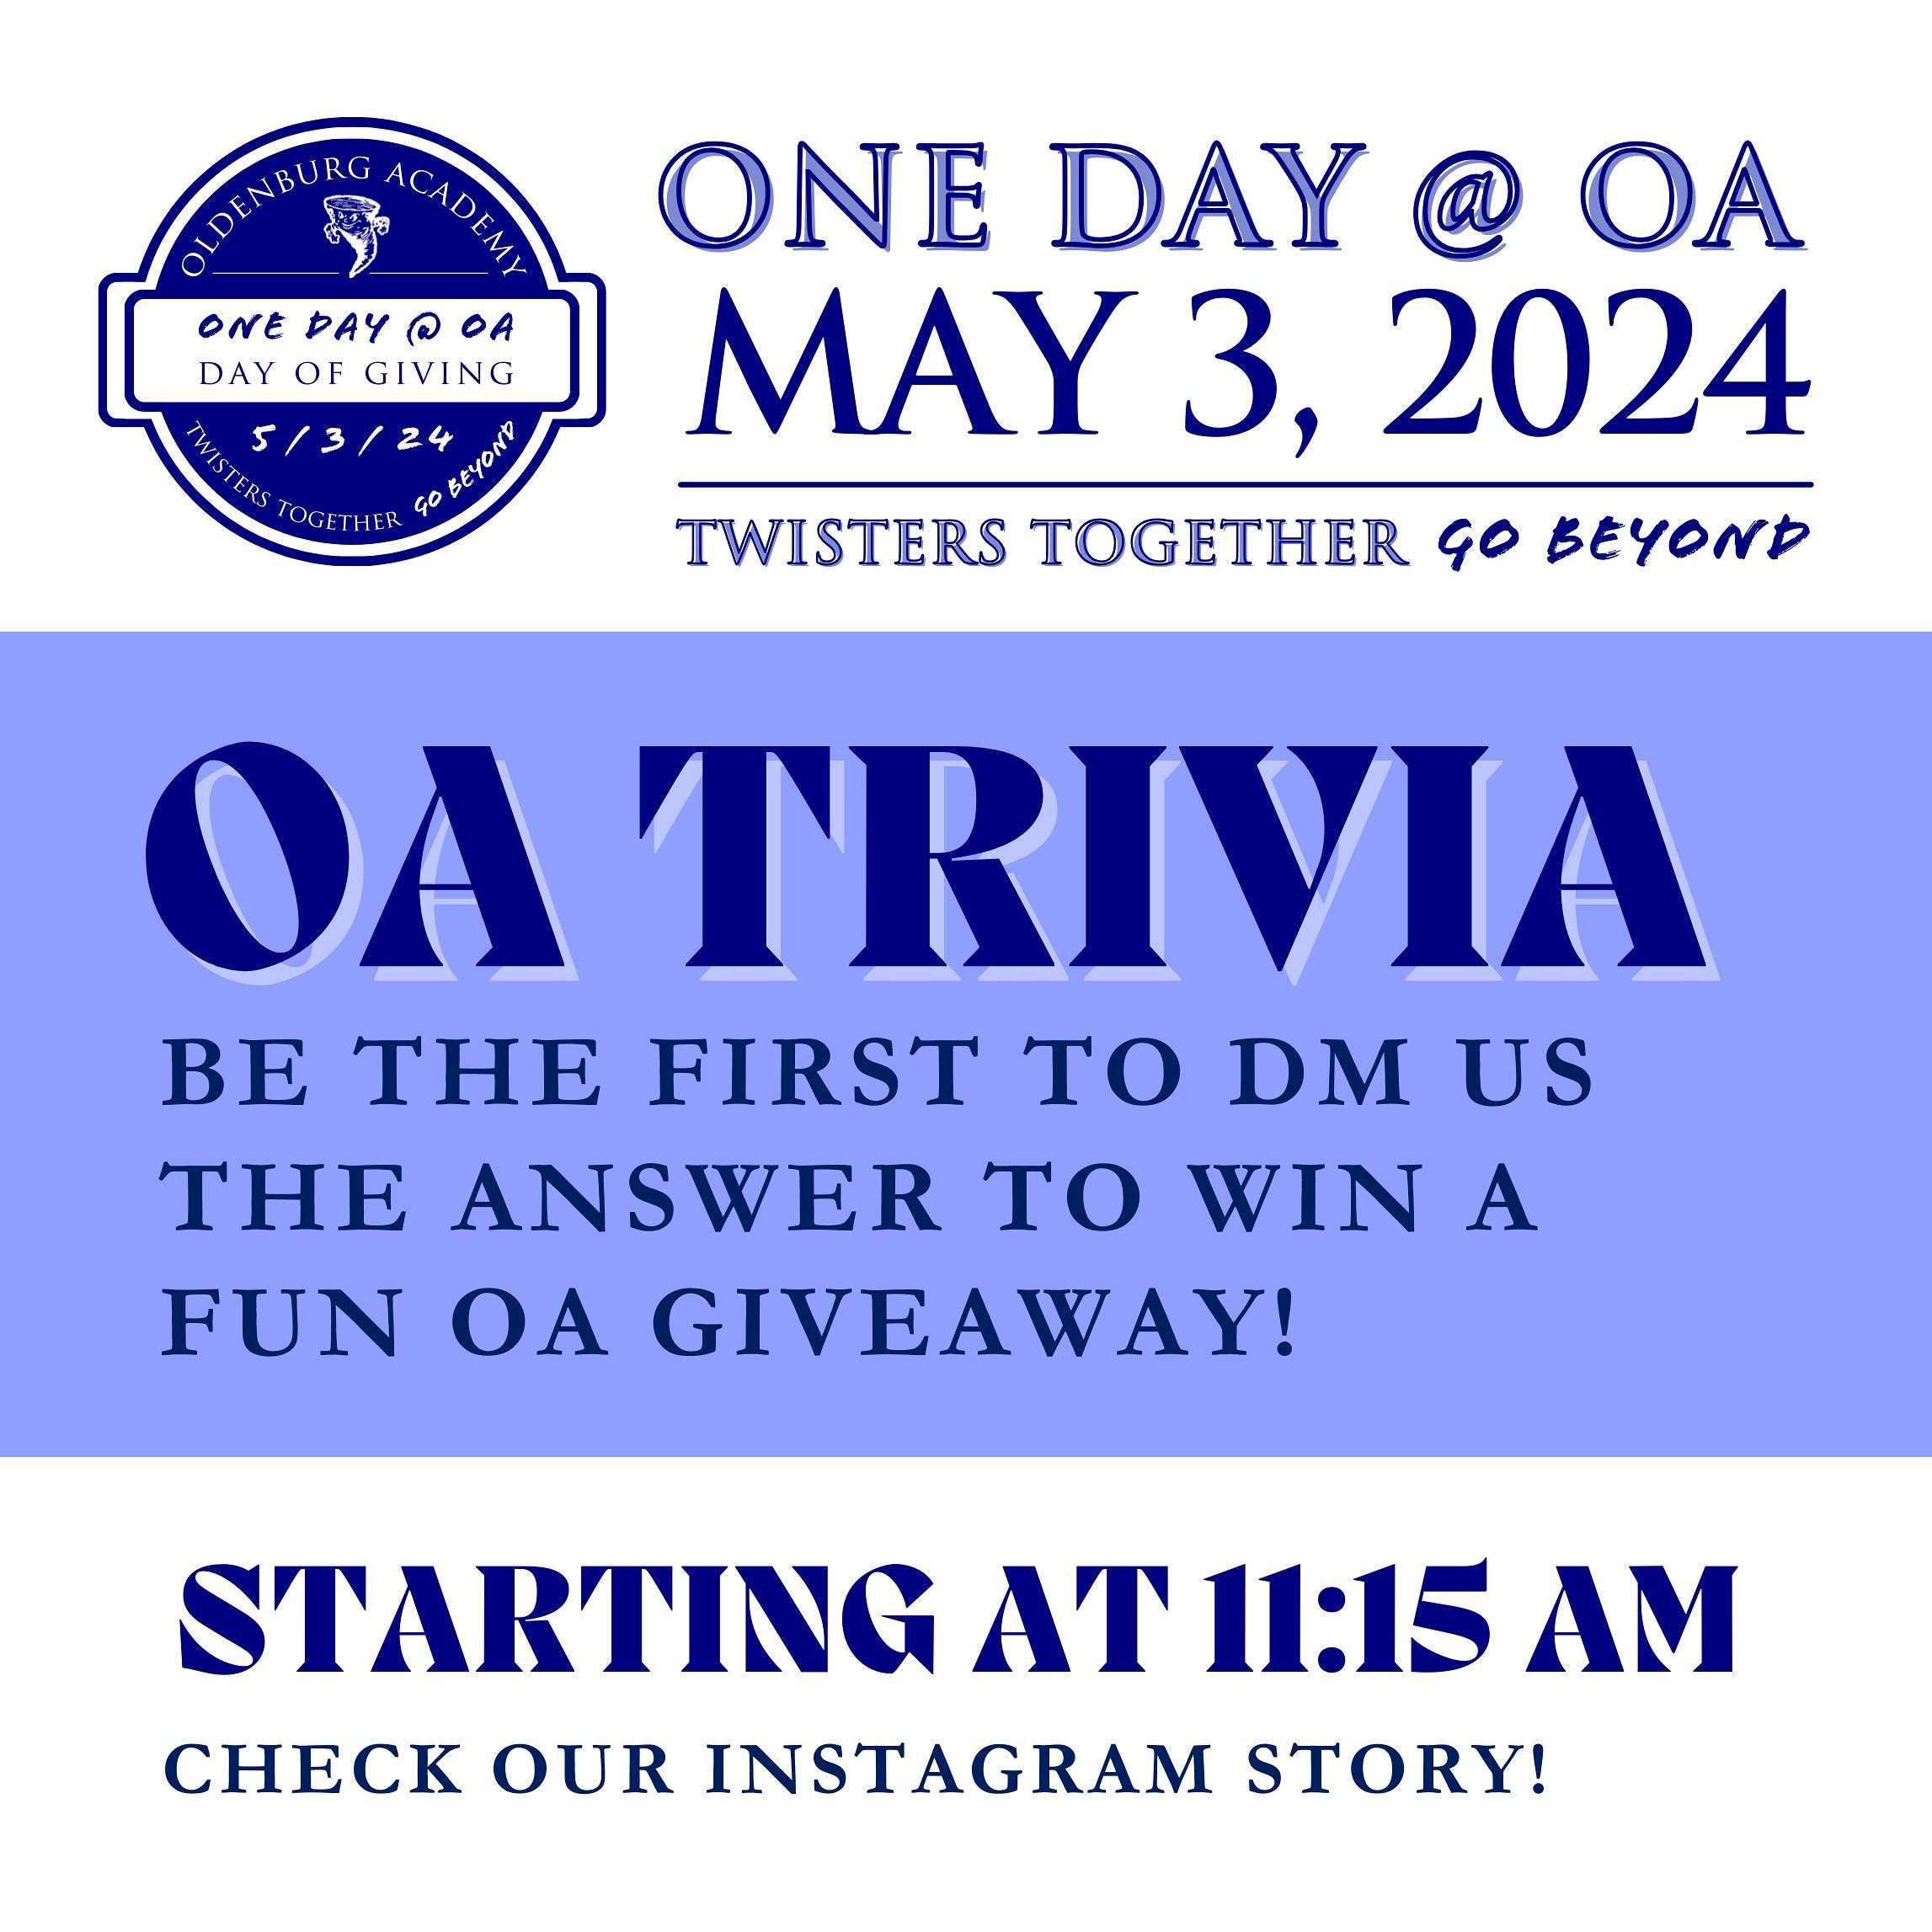 OA Trivia starts at 11:15 AM!

Check our Instagram story for the first question!